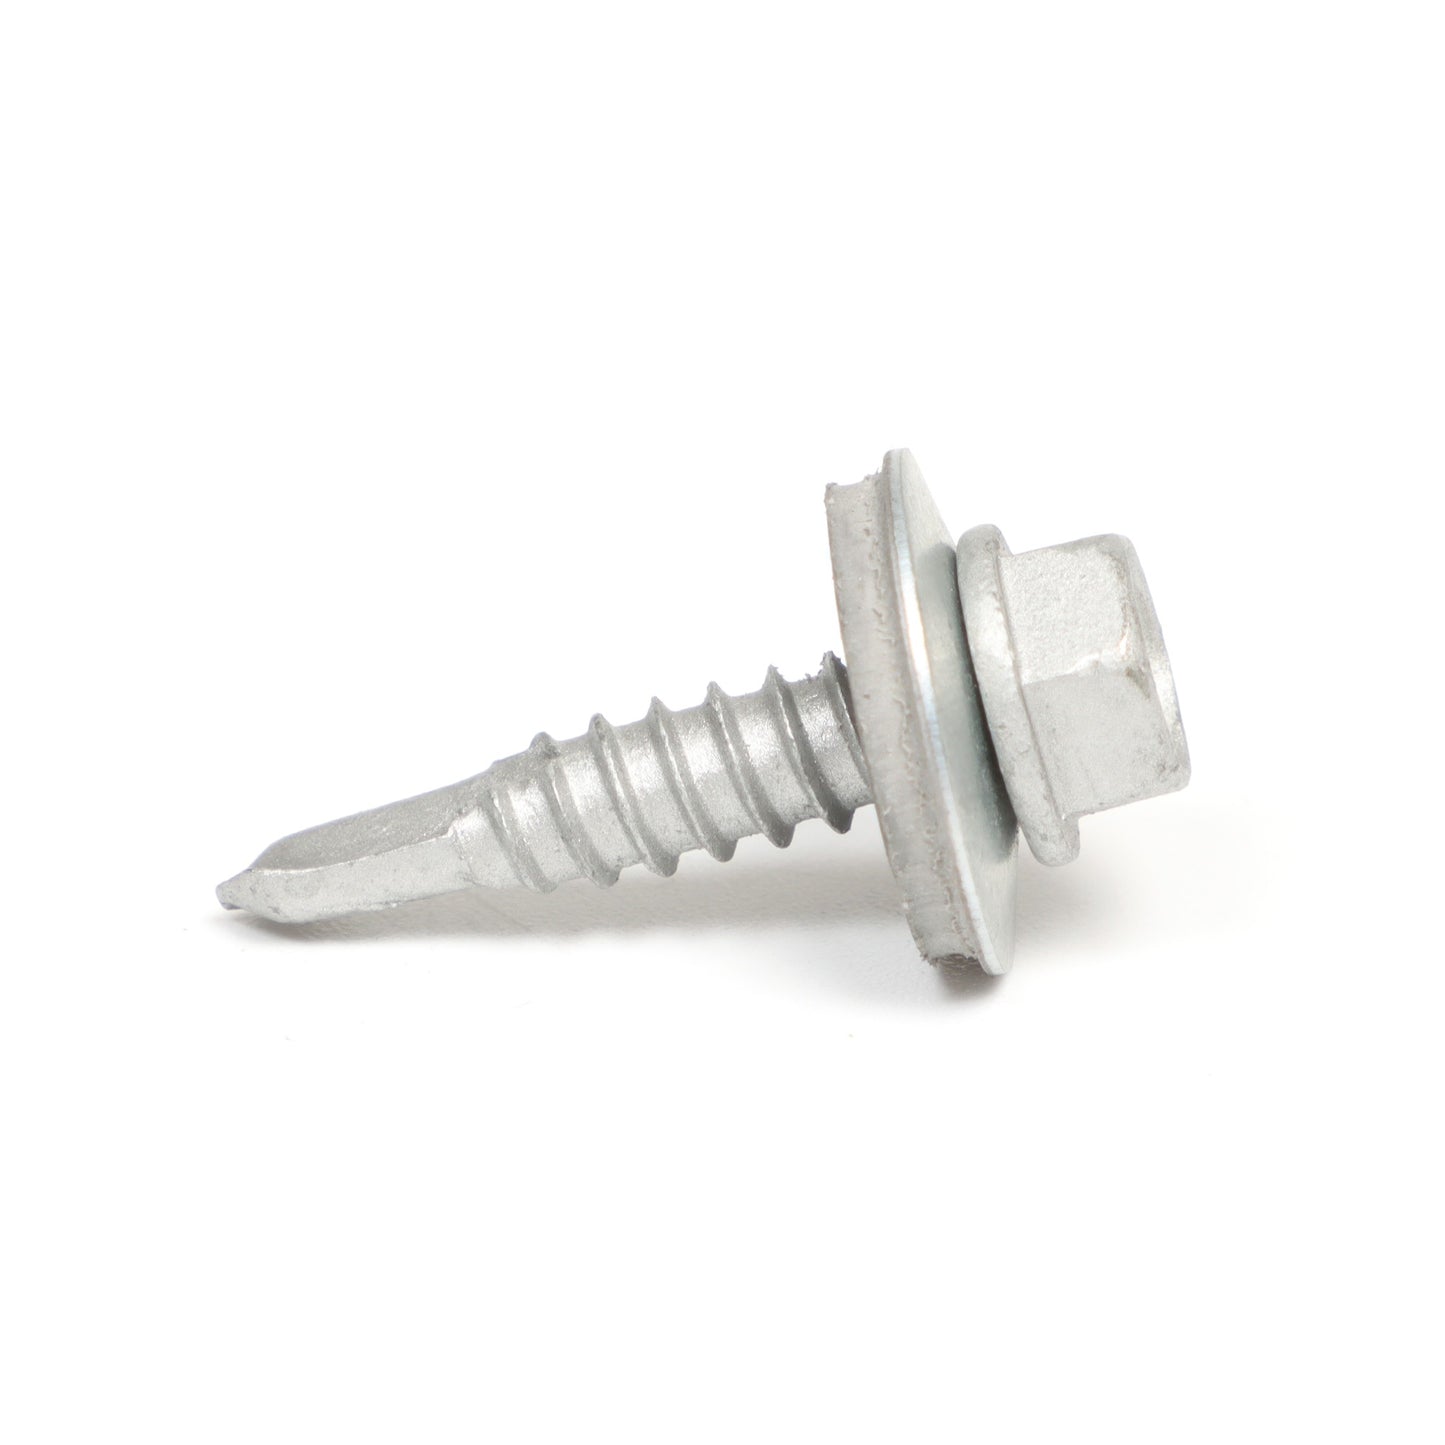 5.5mmx22mm self-tapping screw